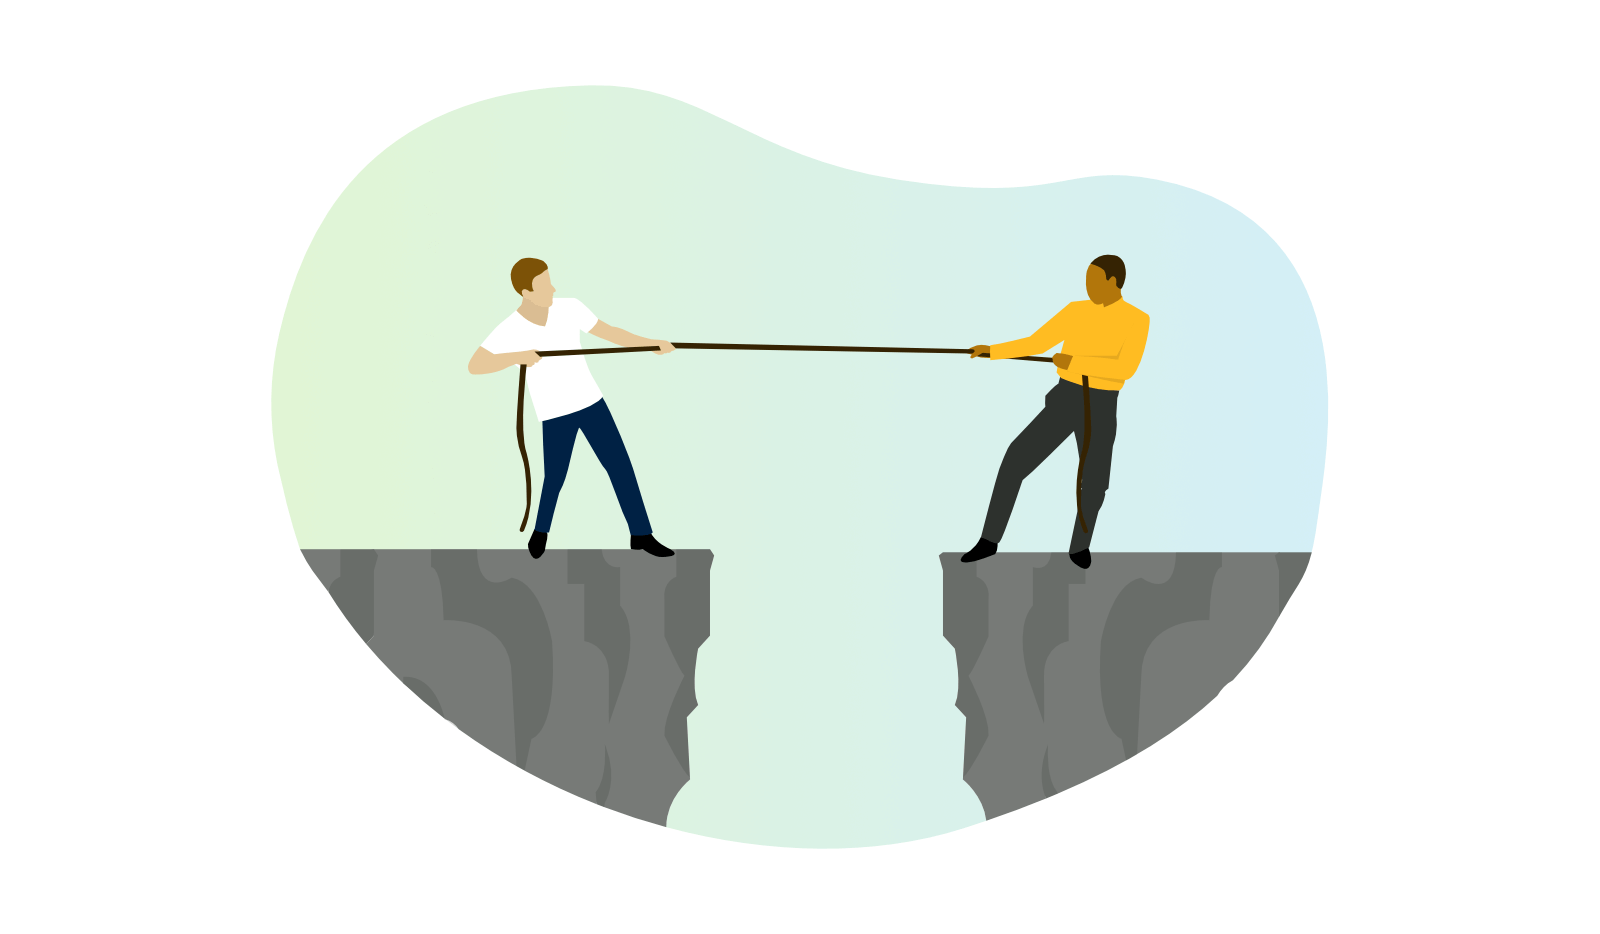 Illustration of two people doing tug-of-war across a chasm